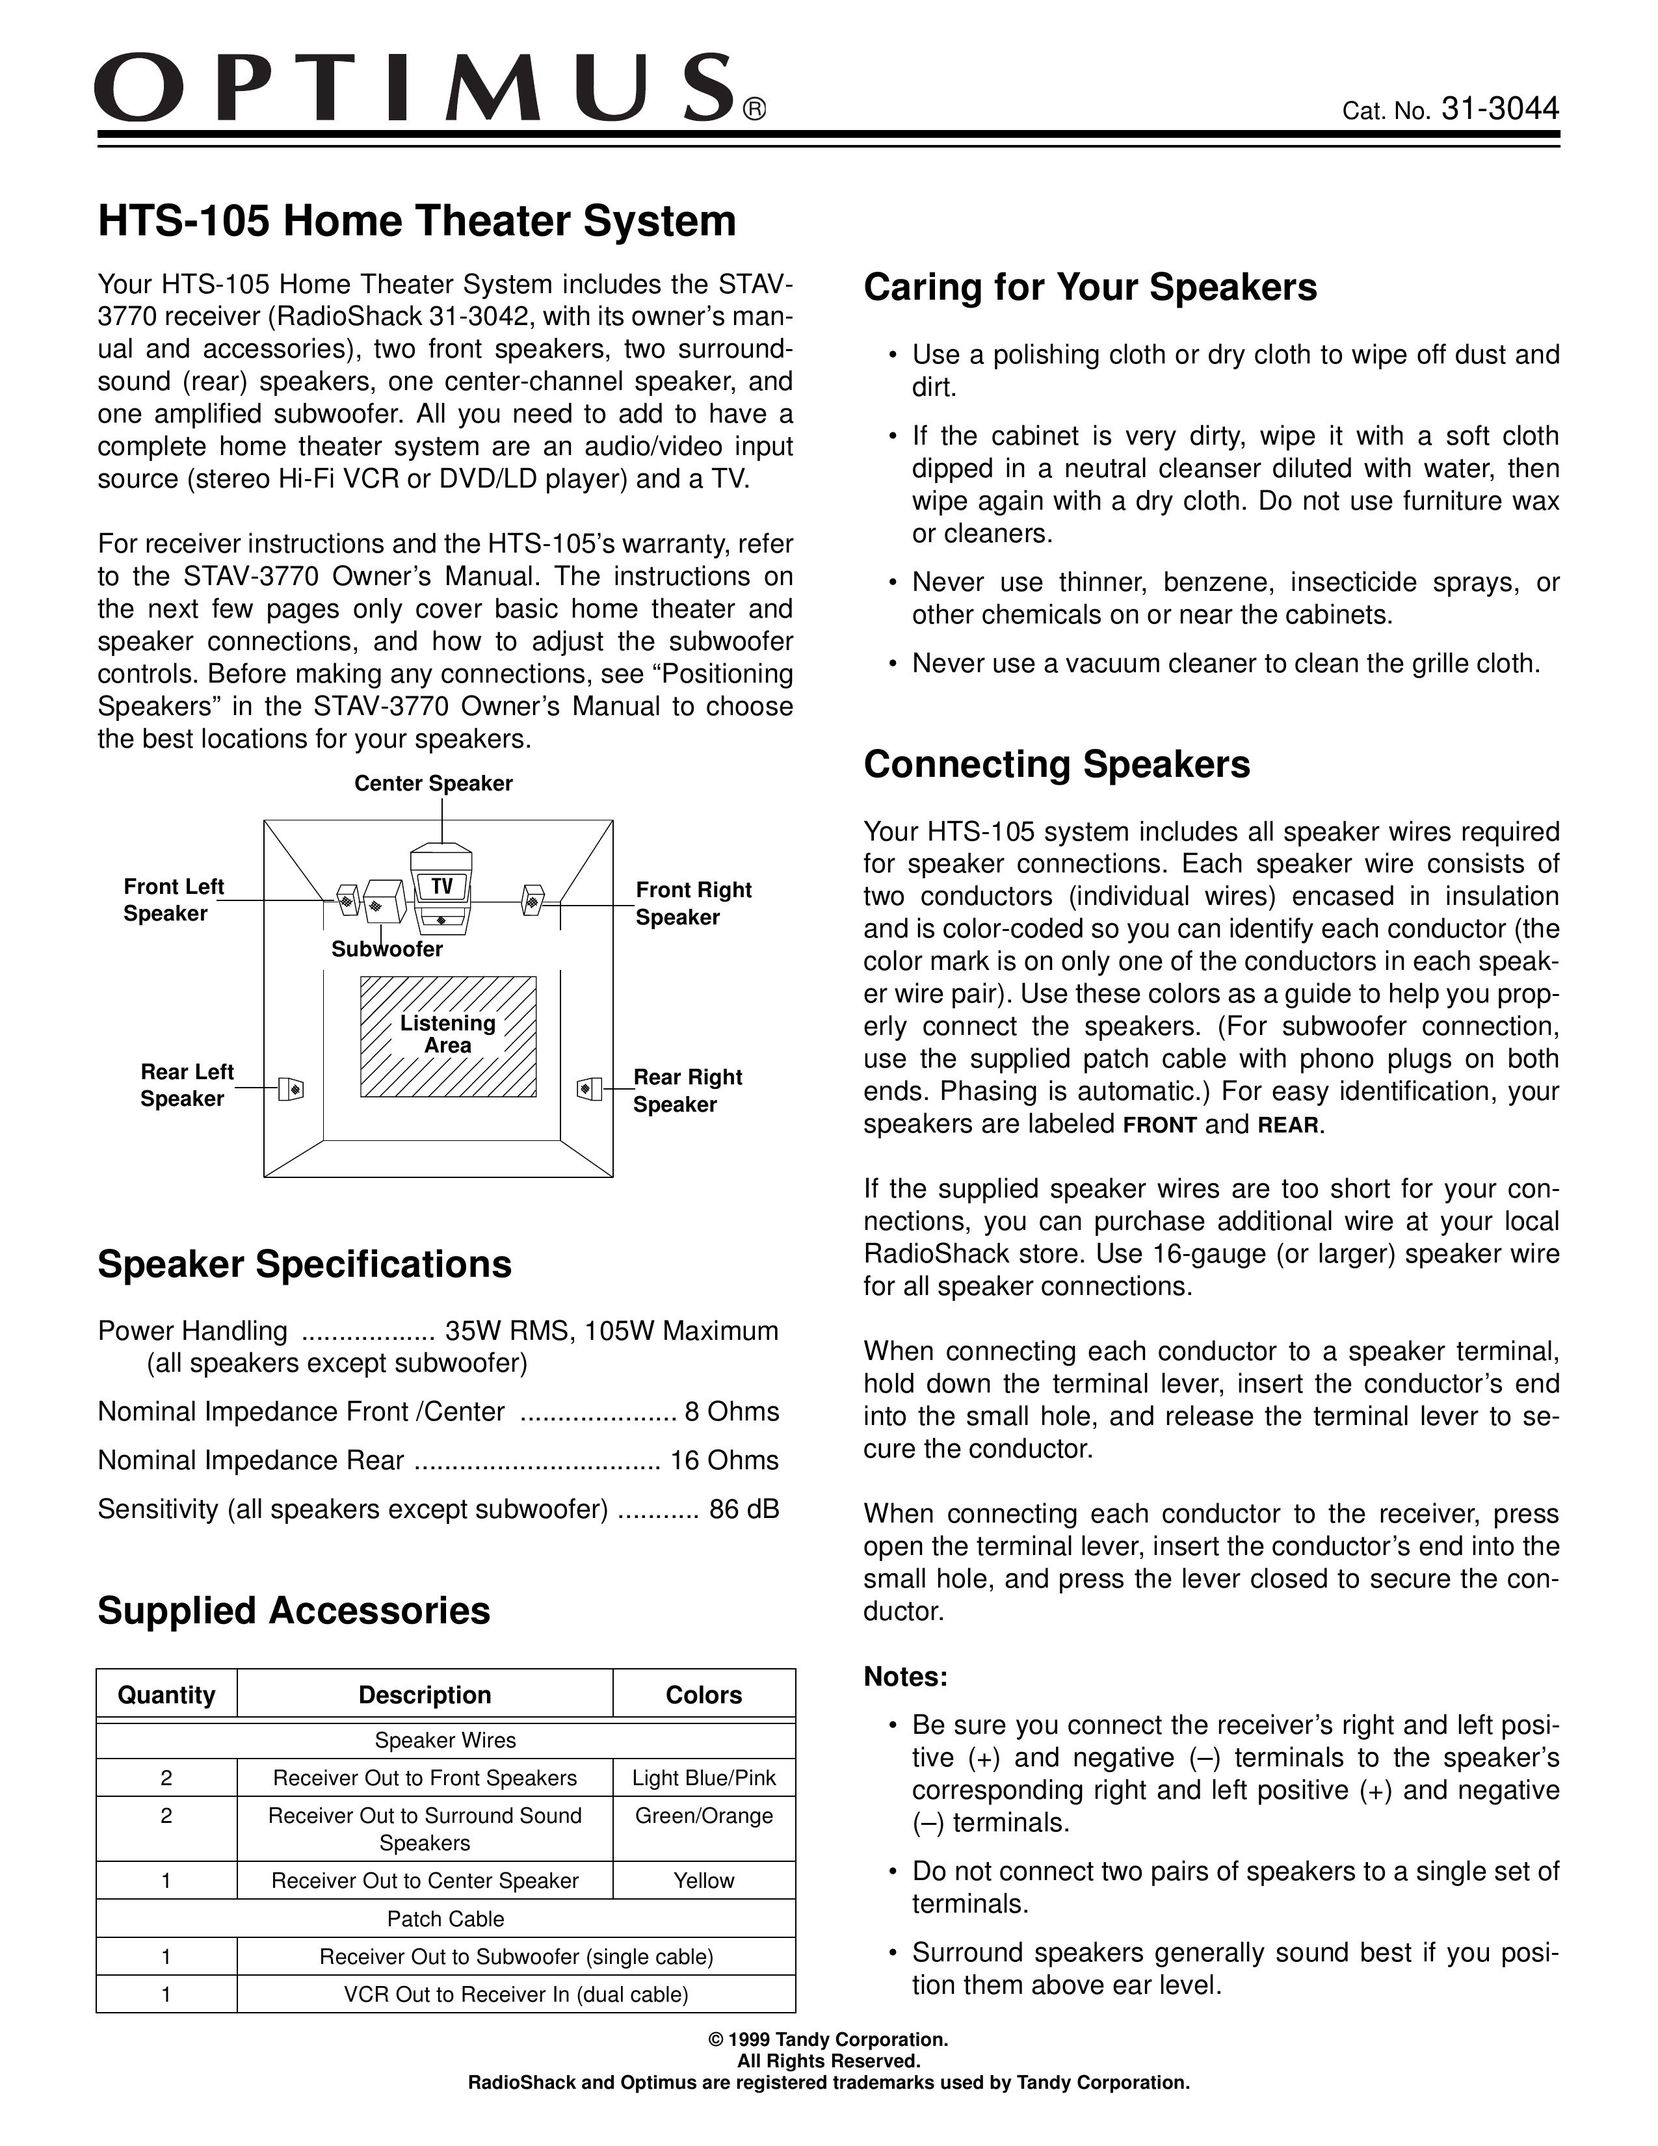 Optimus 31-3044 Home Theater System User Manual